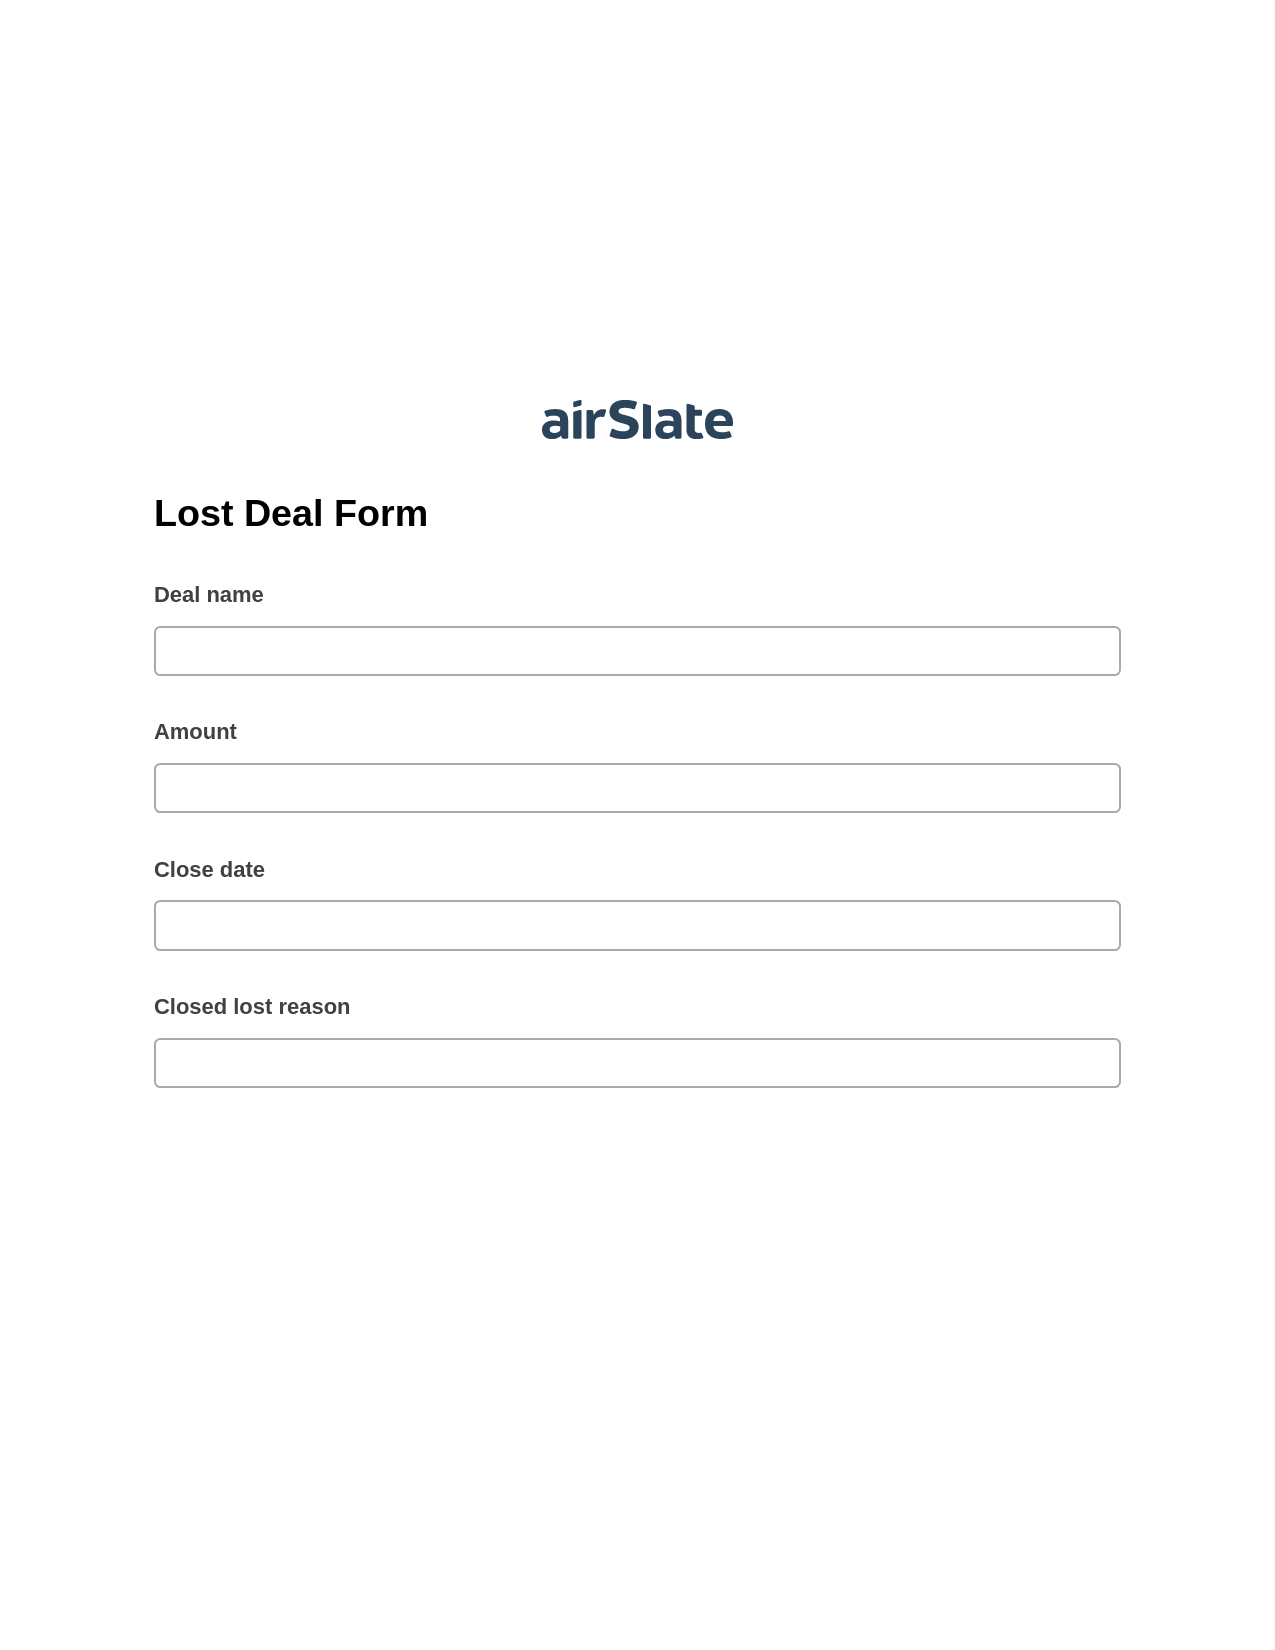 Multirole Lost Deal Form Pre-fill from CSV File Bot, Roles Reminder Bot, Archive to Dropbox Bot